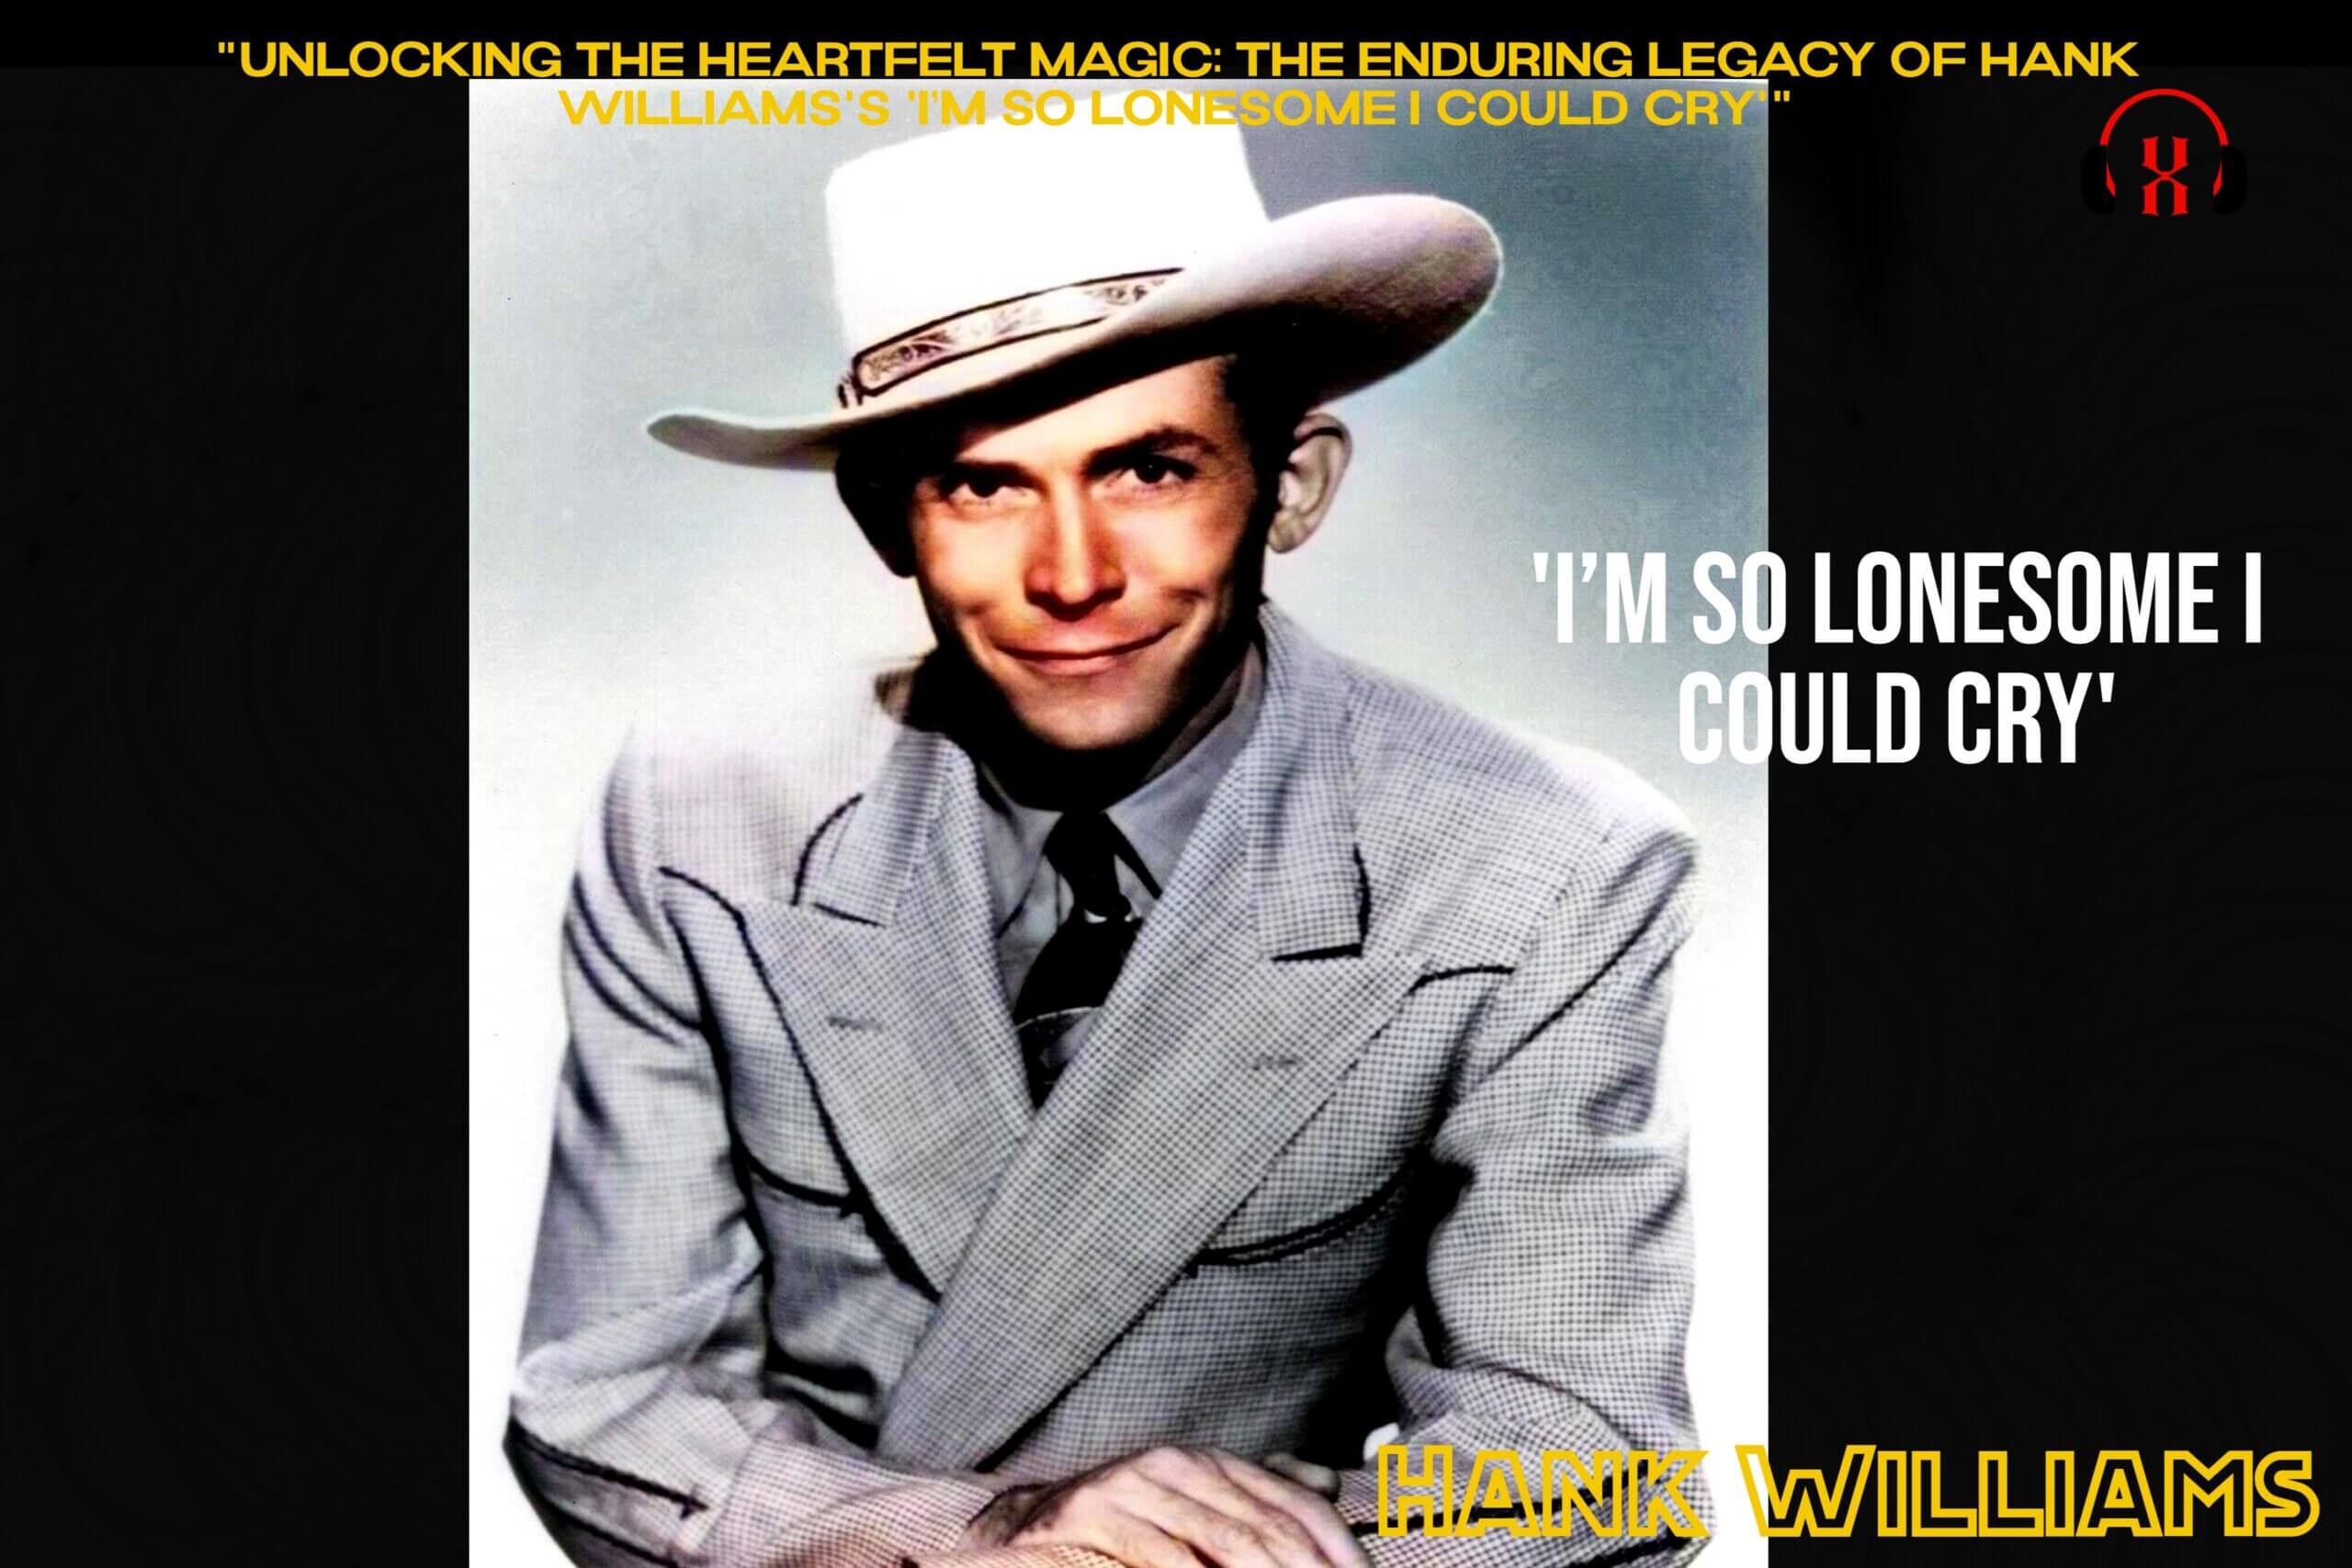 “Unlocking the Heartfelt Magic: The Enduring Legacy of Hank Williams’s ‘I’m So Lonesome I Could Cry'”